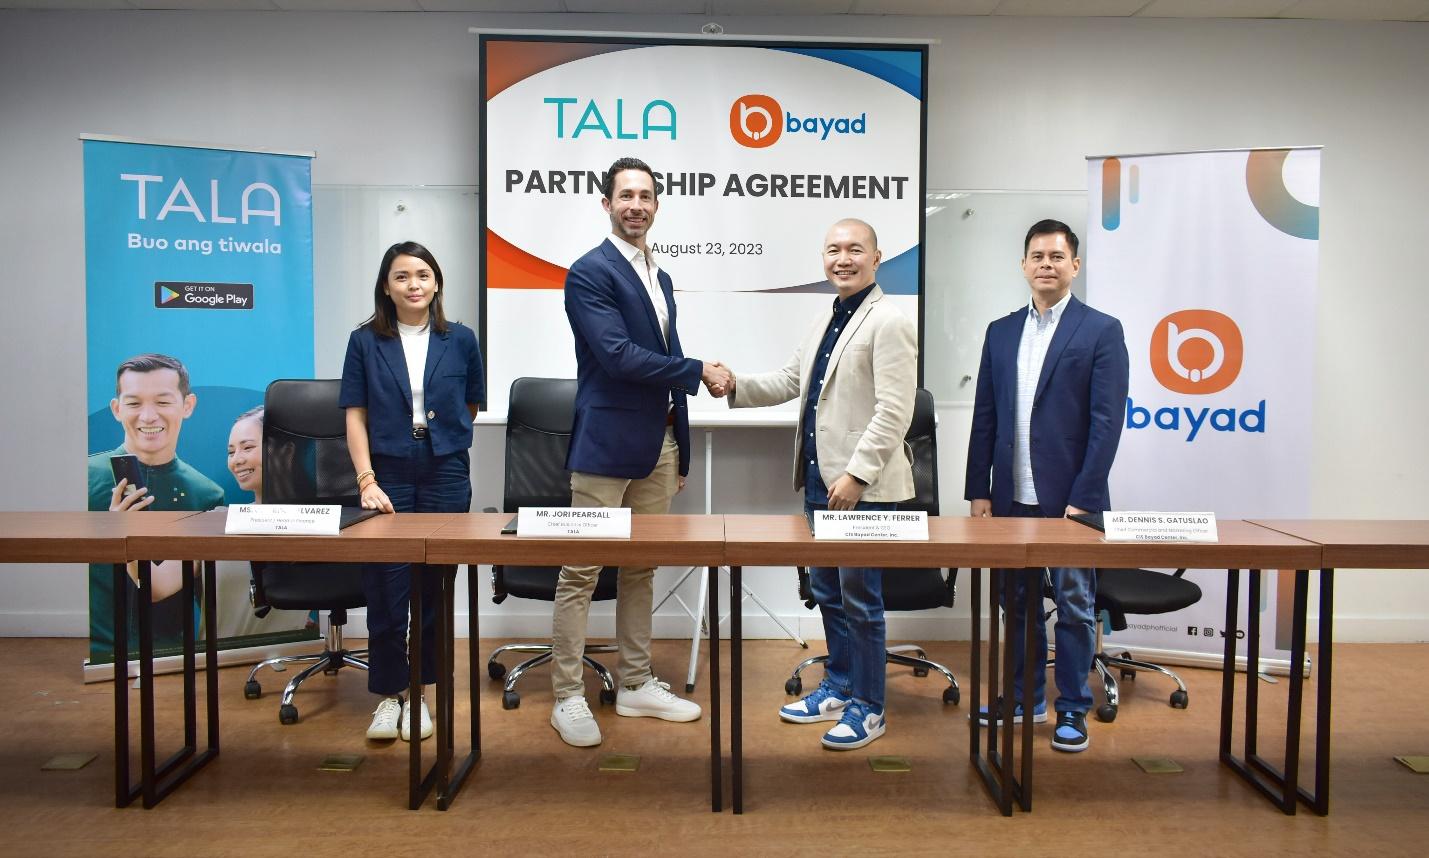 BAYAD SEALS PARTNERSHIP WITH TALA, ENABLING CONVENIENT BILLS PAYMENT SERVICES